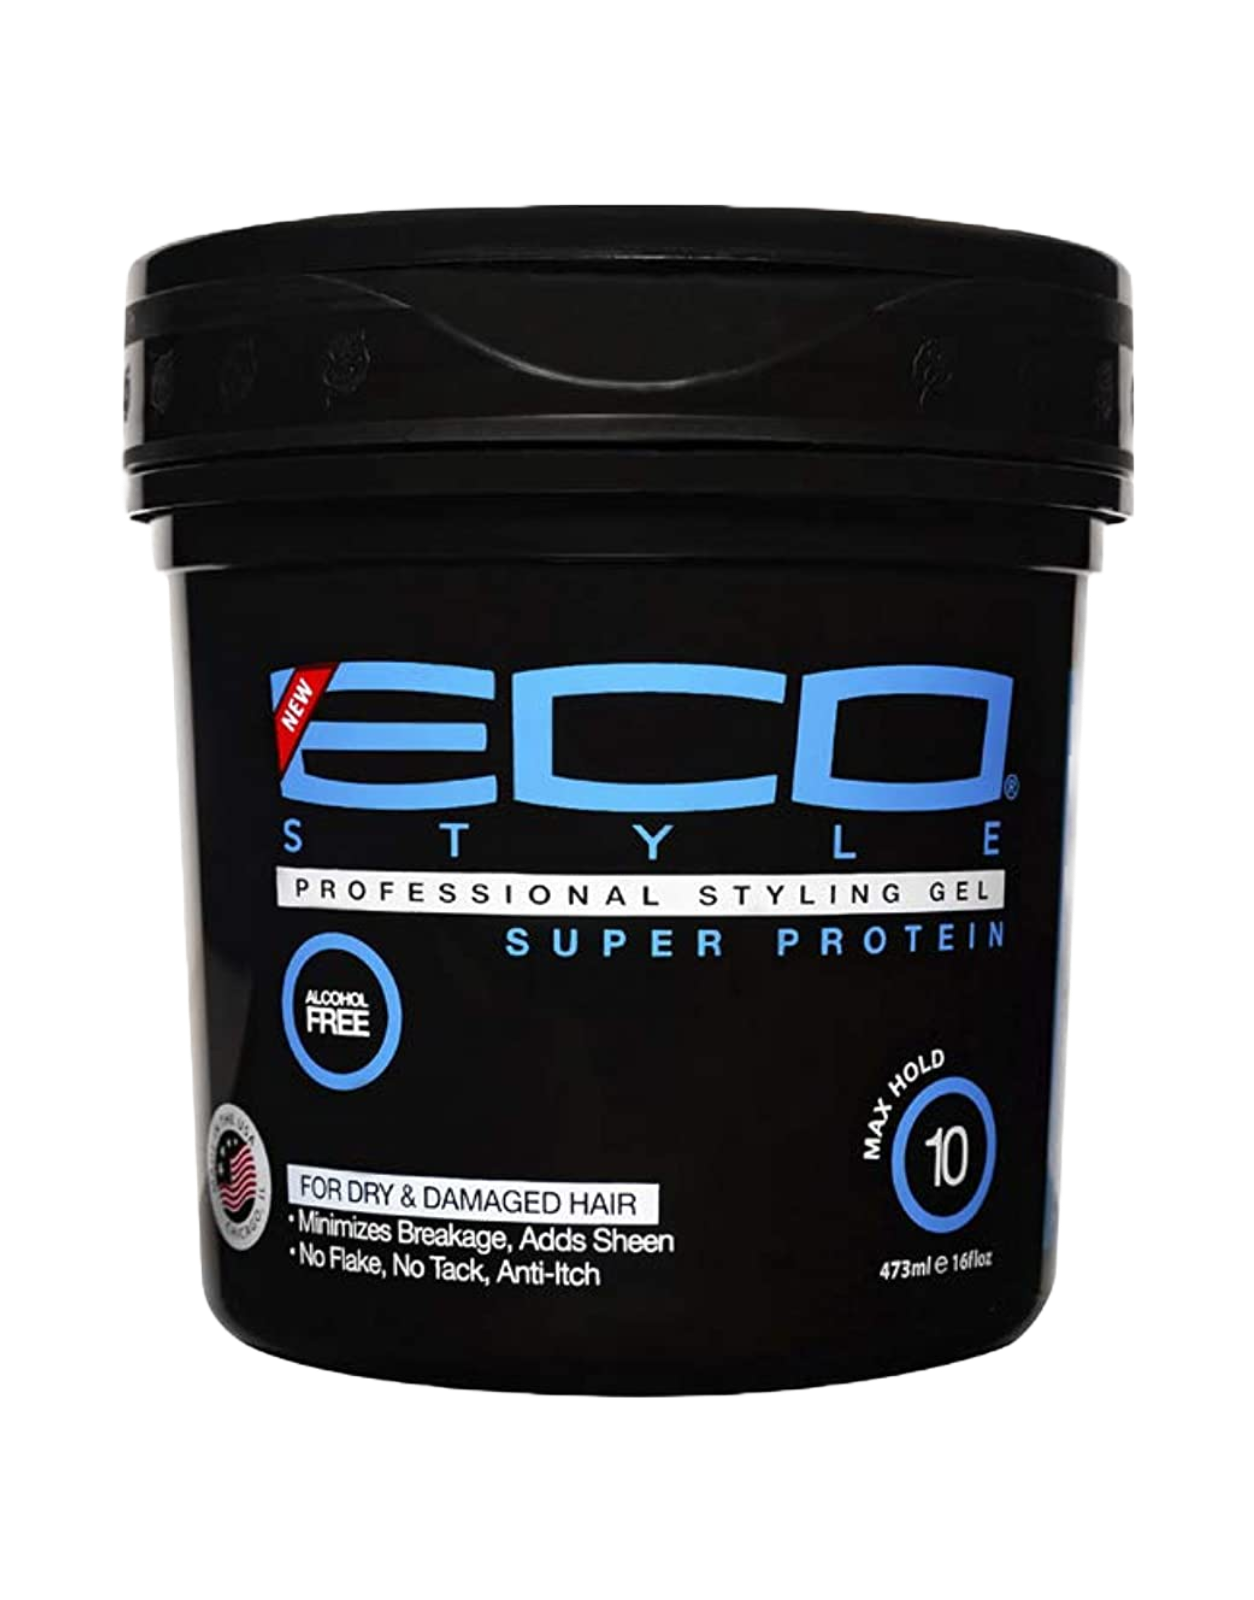 ECO - Super Protein Styling Gel